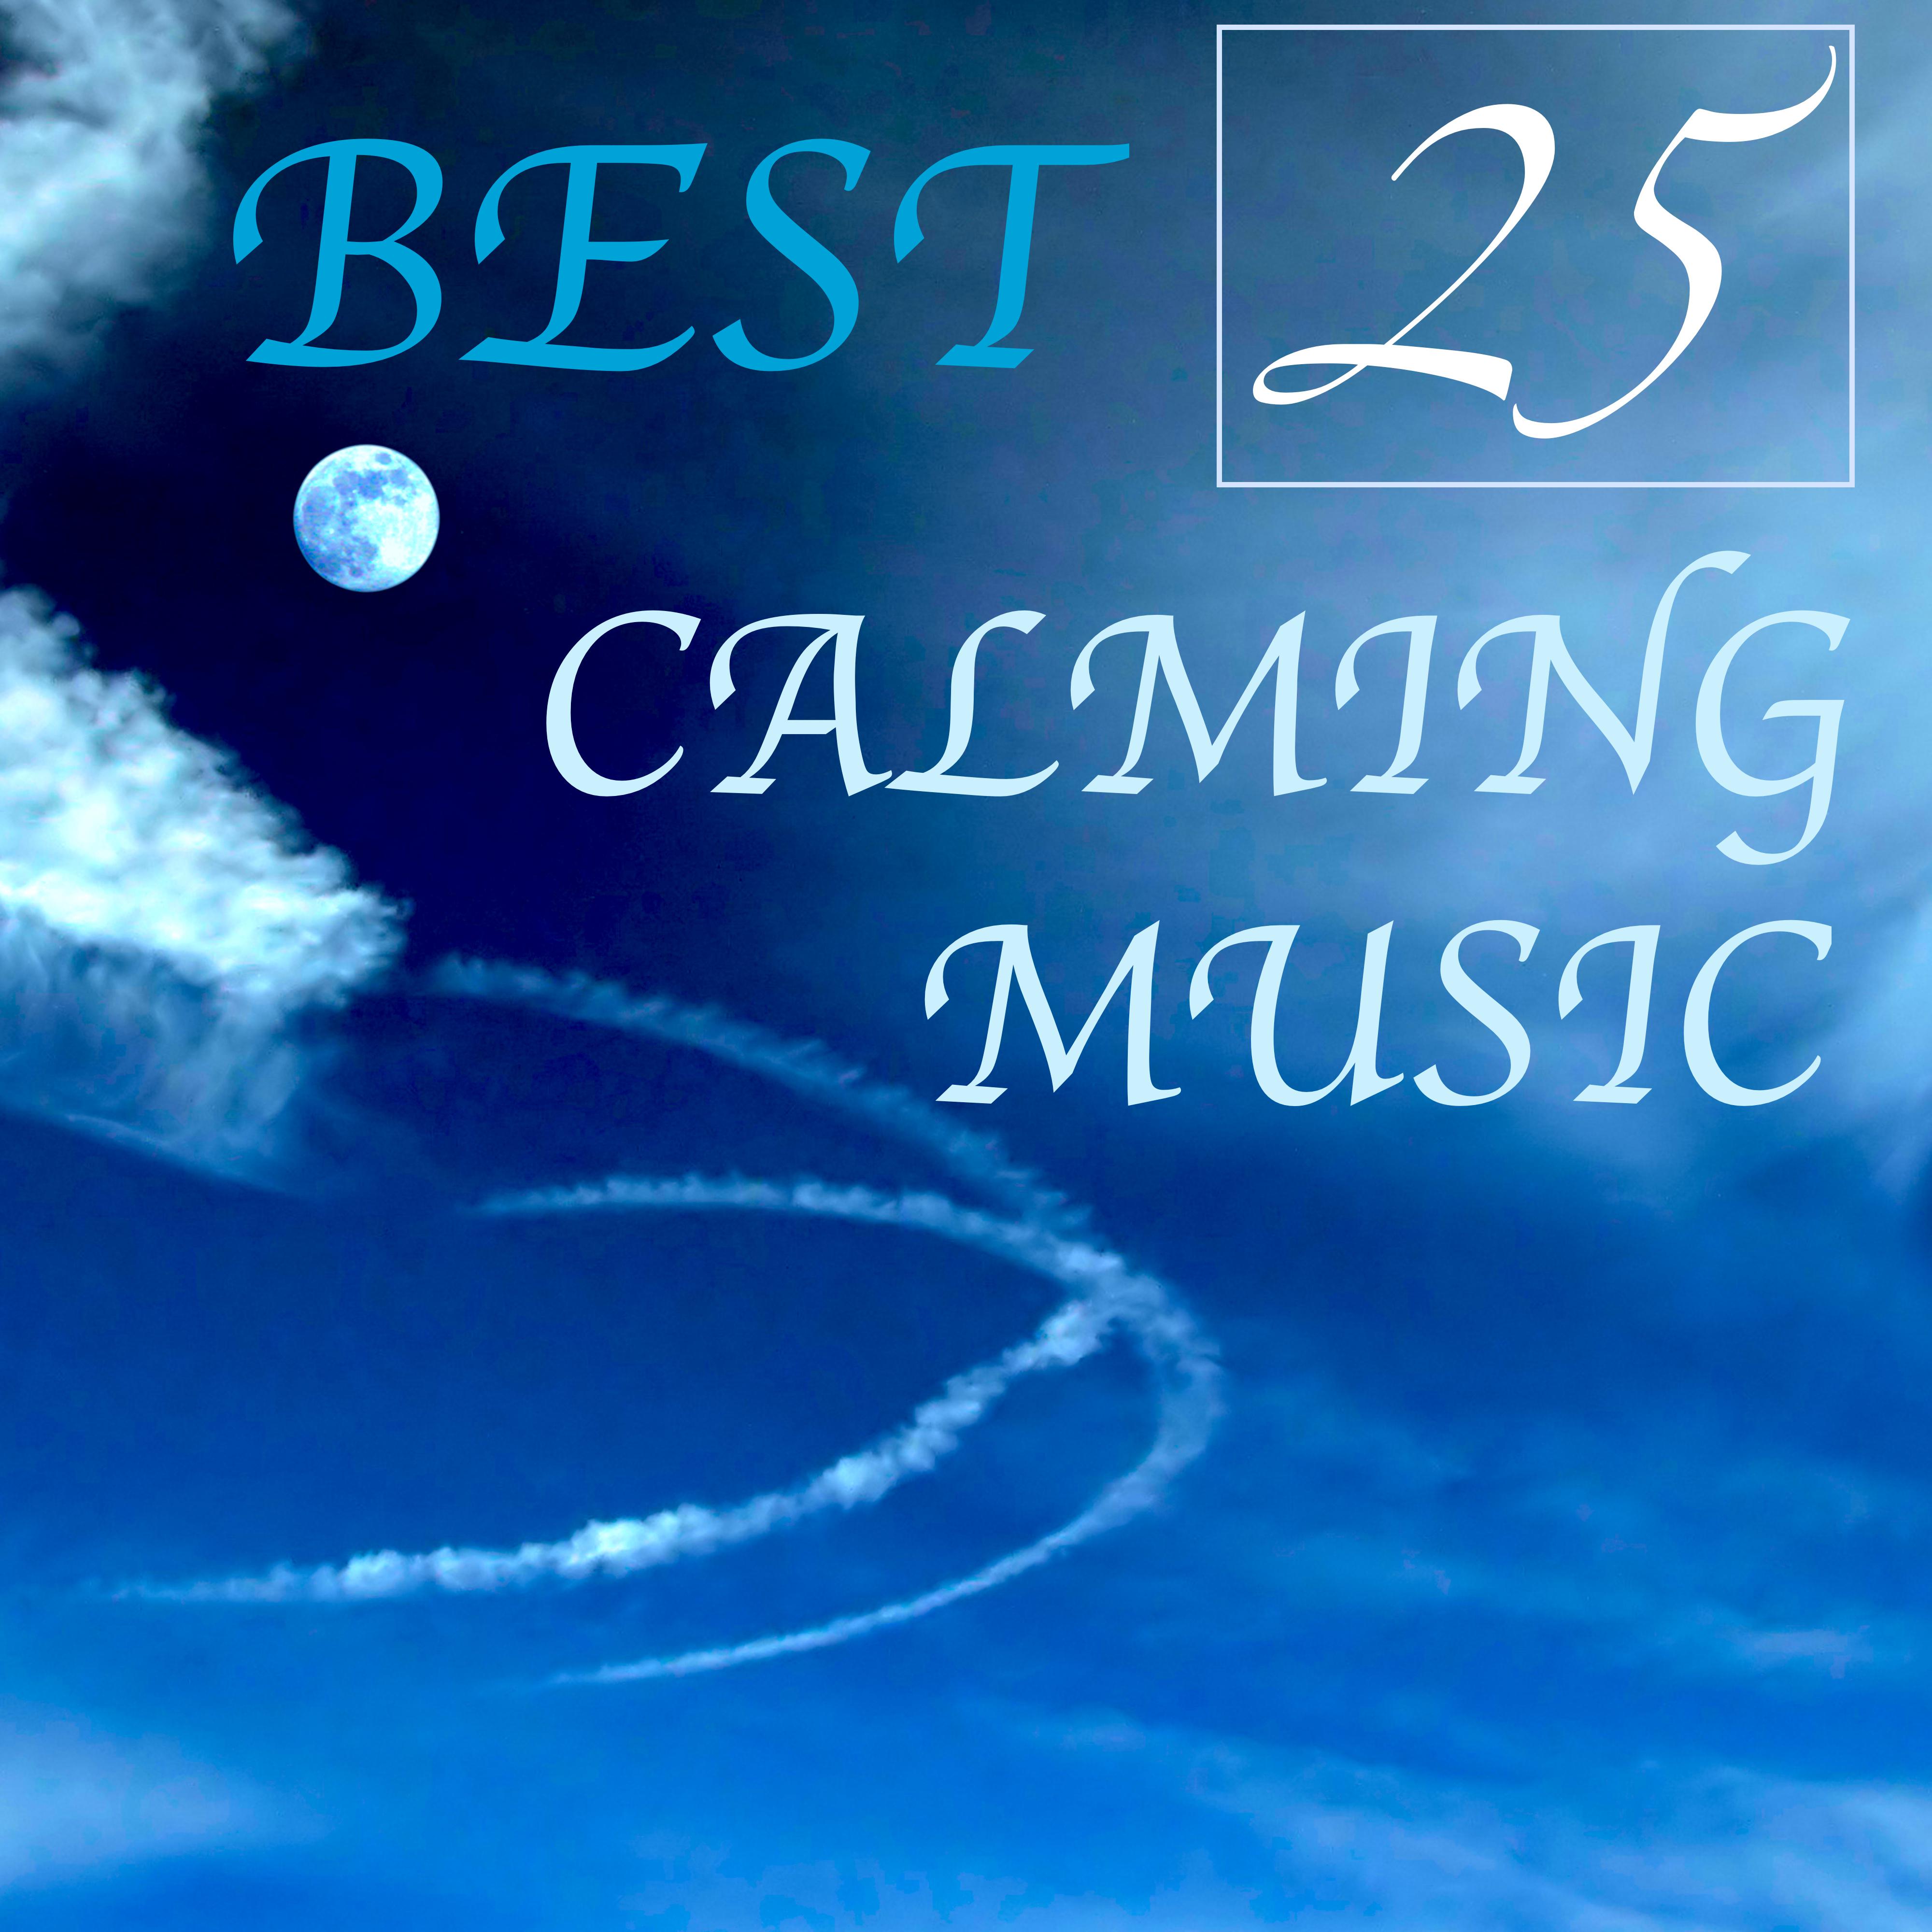 Best 25 Calming Music: Listen from this Moment to the Top 25 Songs for Relaxation, Meditation & Good Sleep